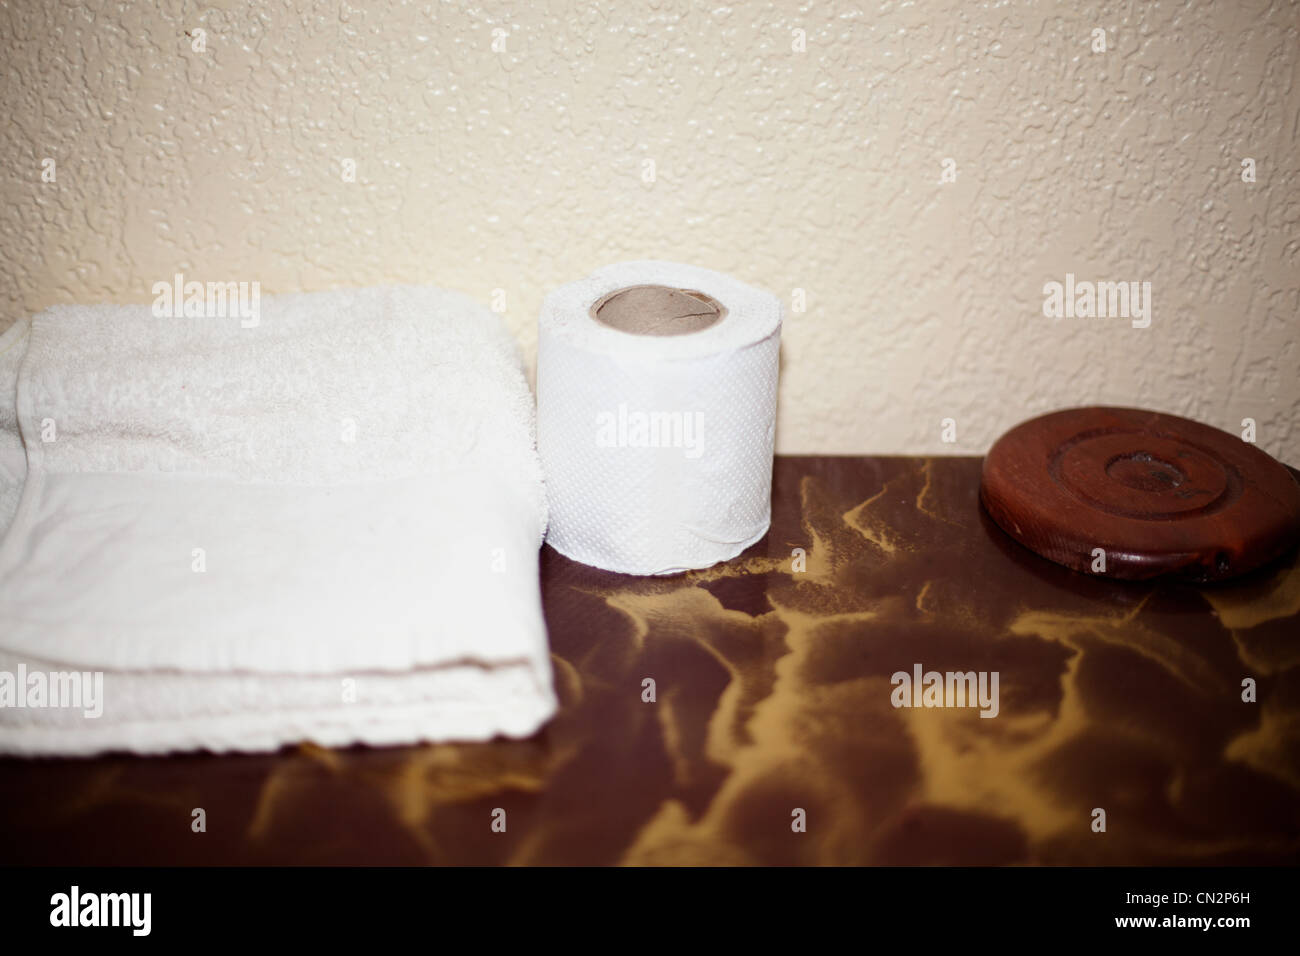 Towel and toilet roll Stock Photo